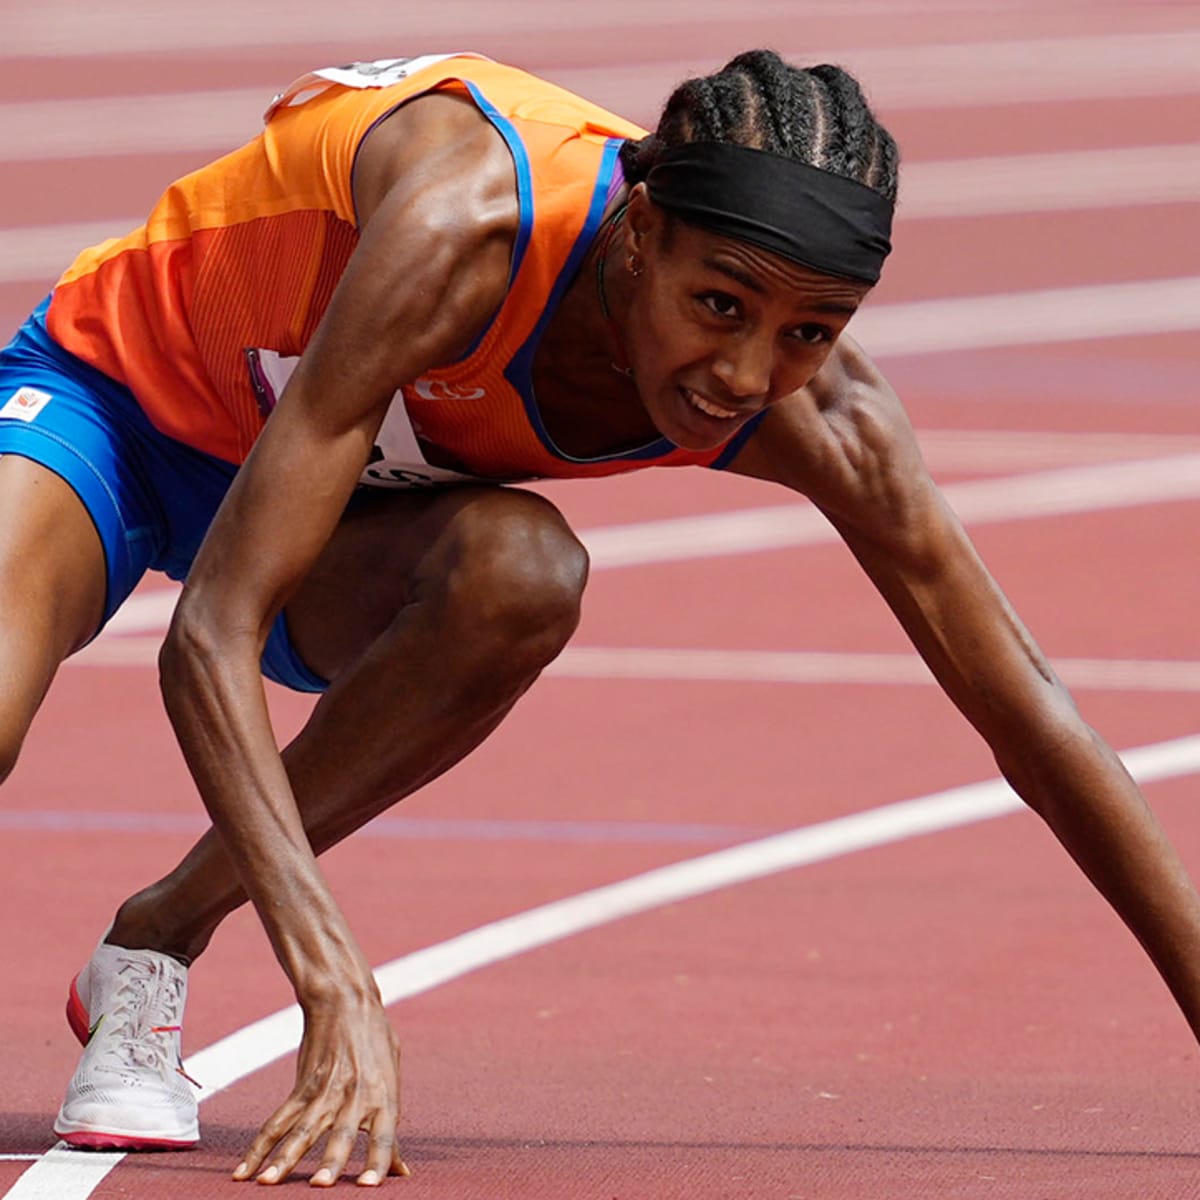 Sifan Hassan: Dutch runner falls during 1500m race, recovers to win - Sports Illustrated